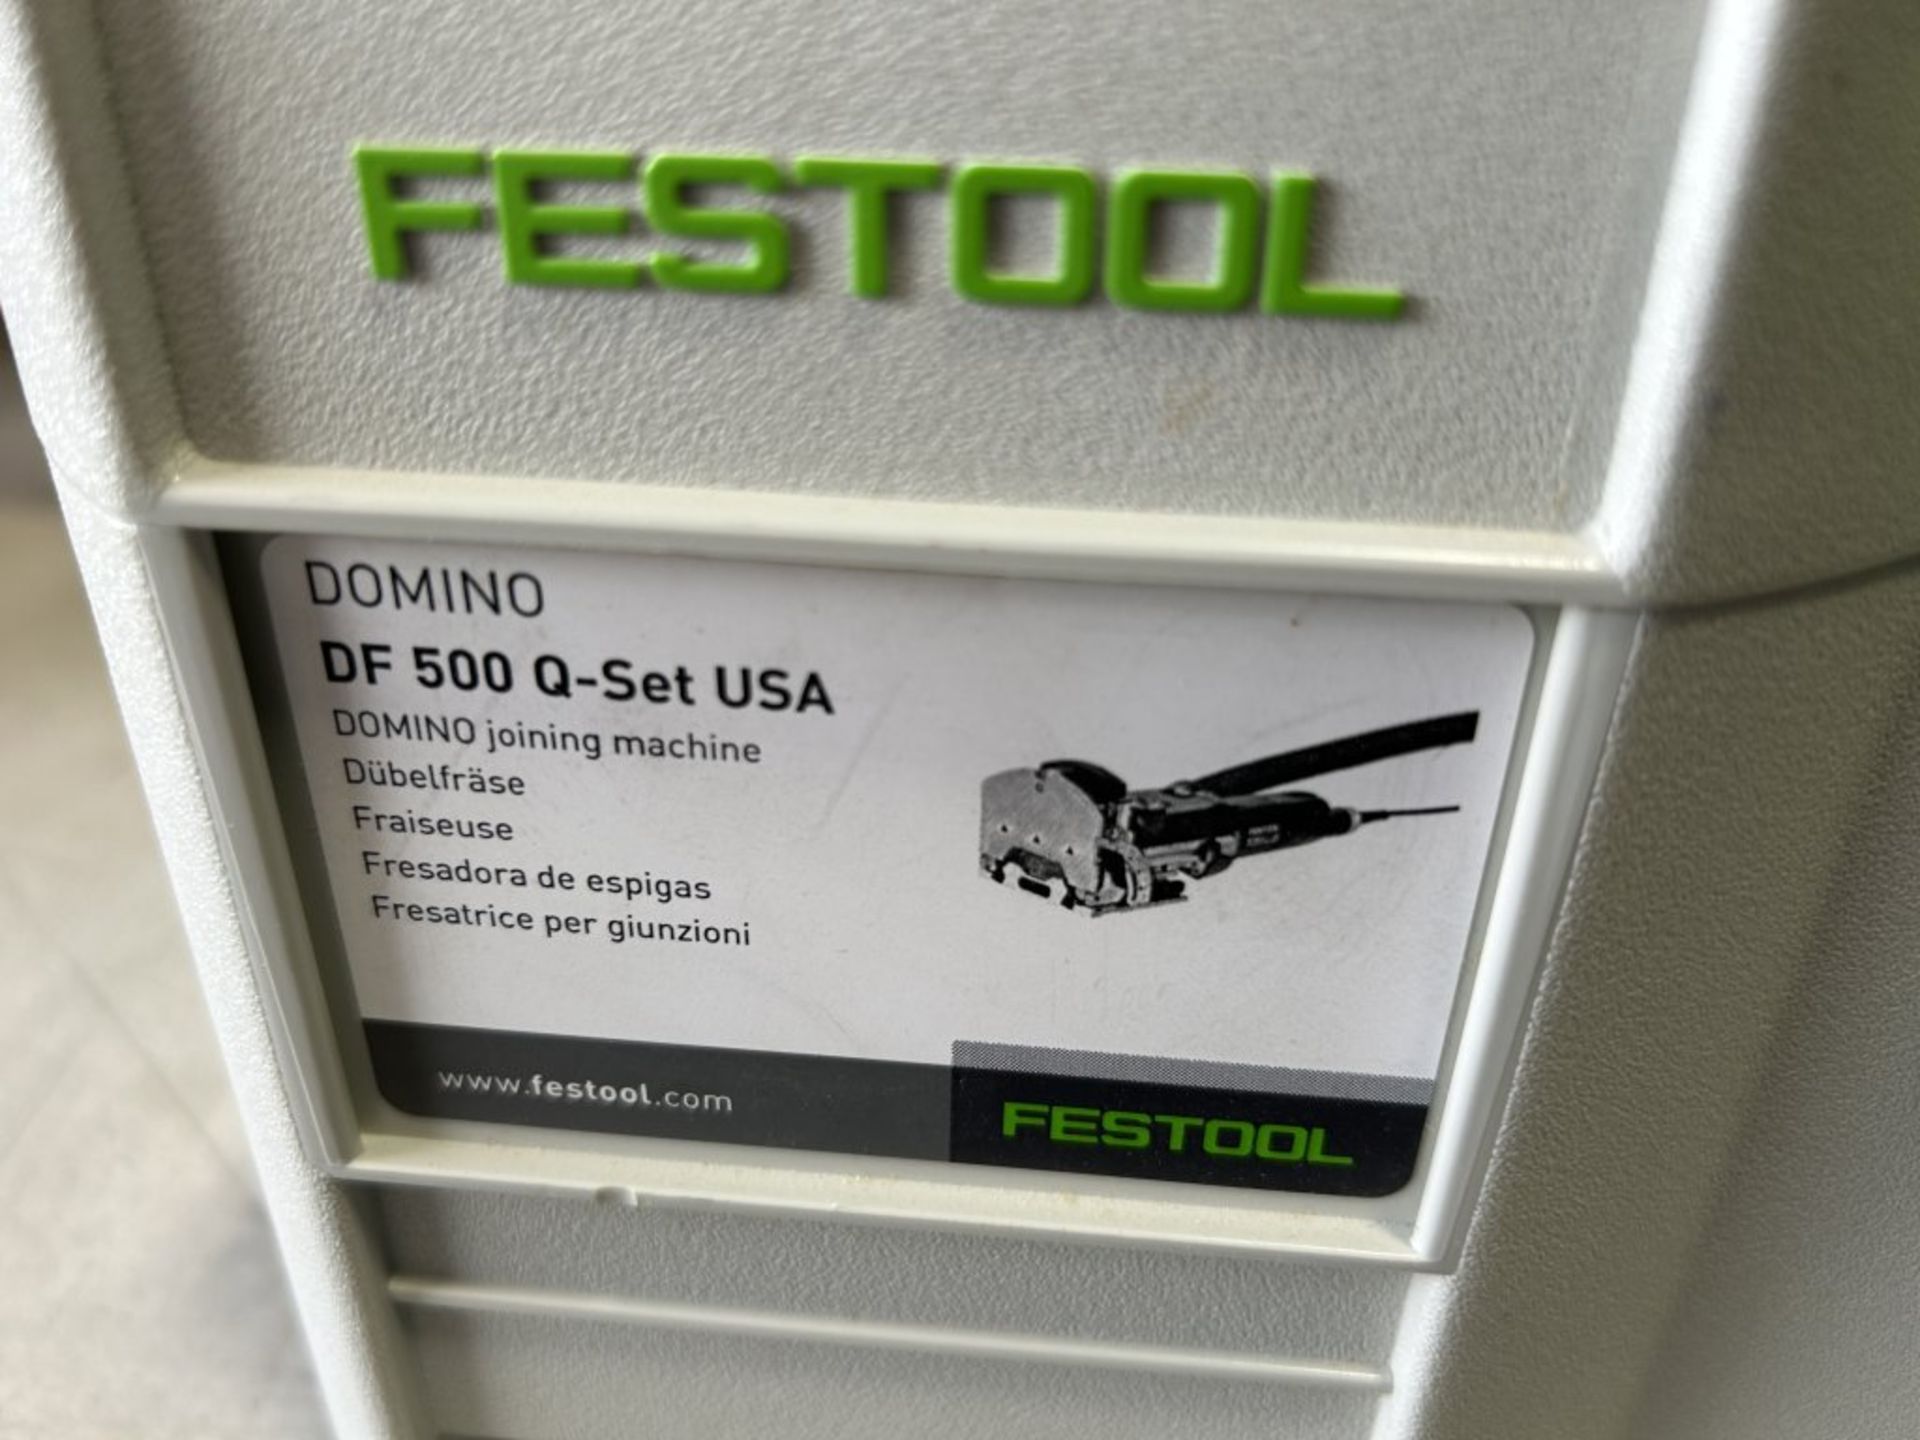 FESTOOL DOMINO DF 500 Q-SET JOINTING MACHINE WITH CASE - Image 3 of 6